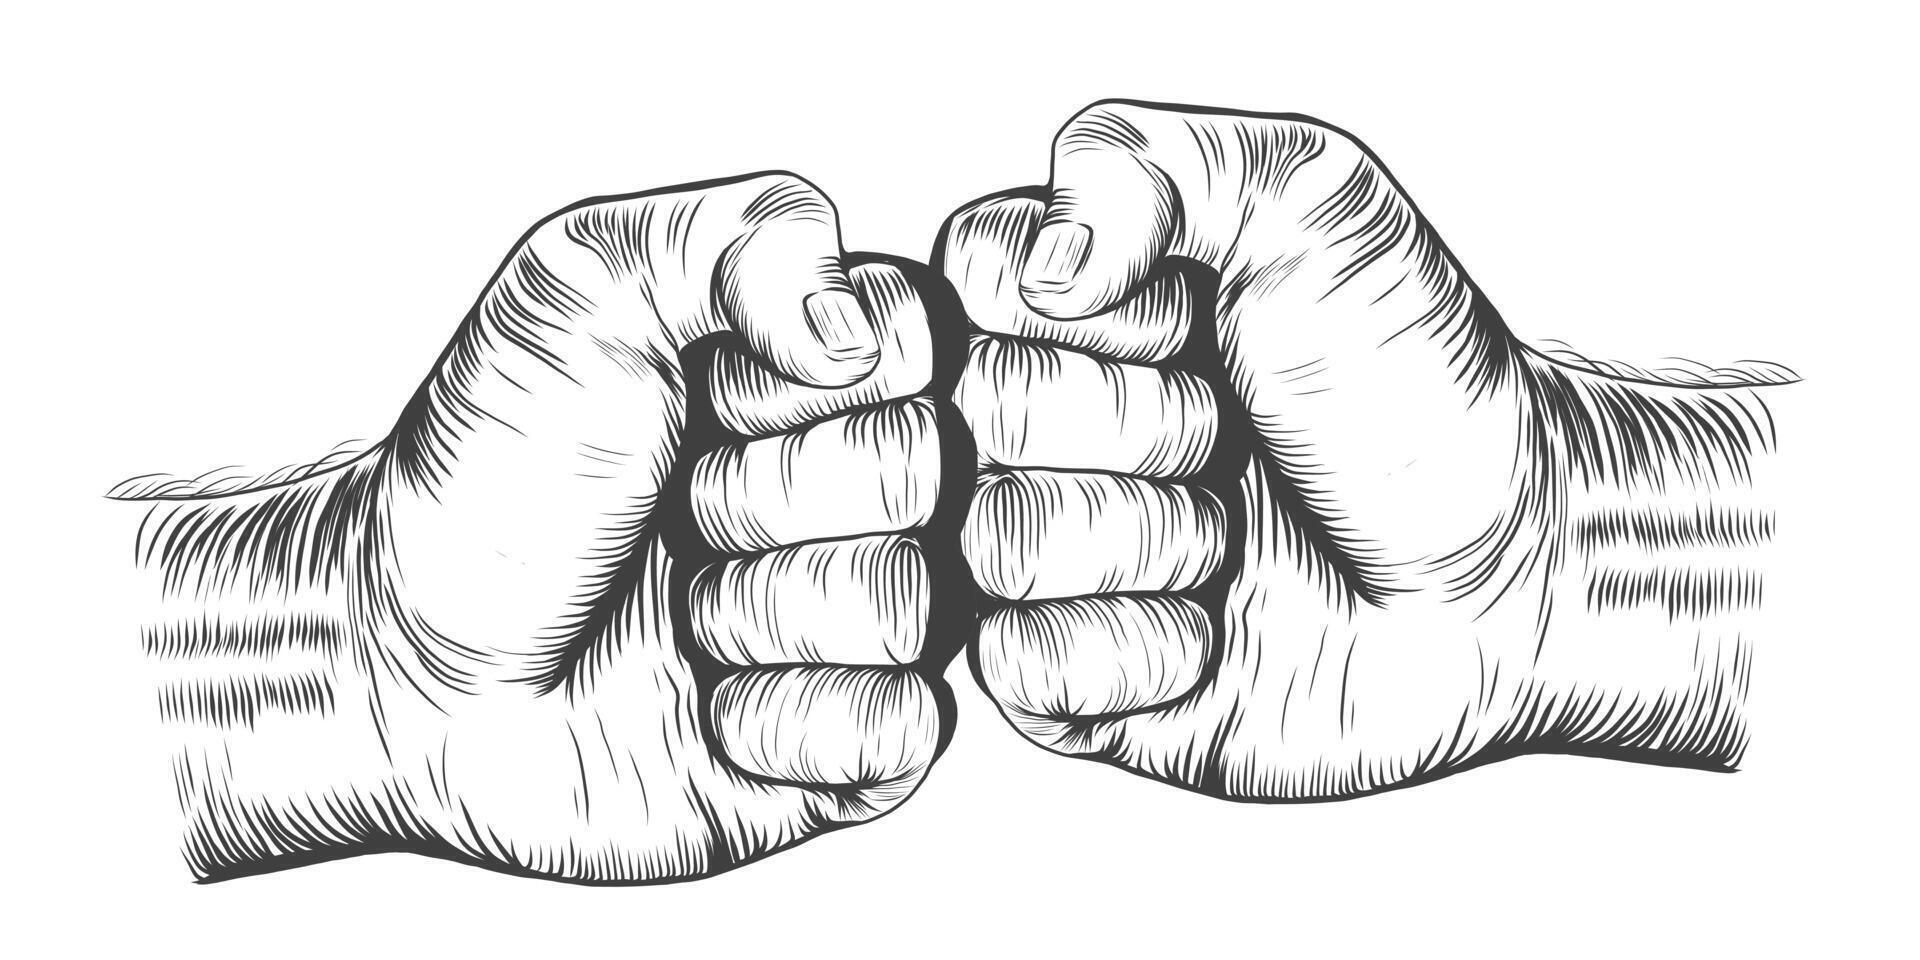 Hand drawn fist to fist symbol. Two hands fist bump punch fists in a vintage woodcut style. isolated on white background. Engraving style vector